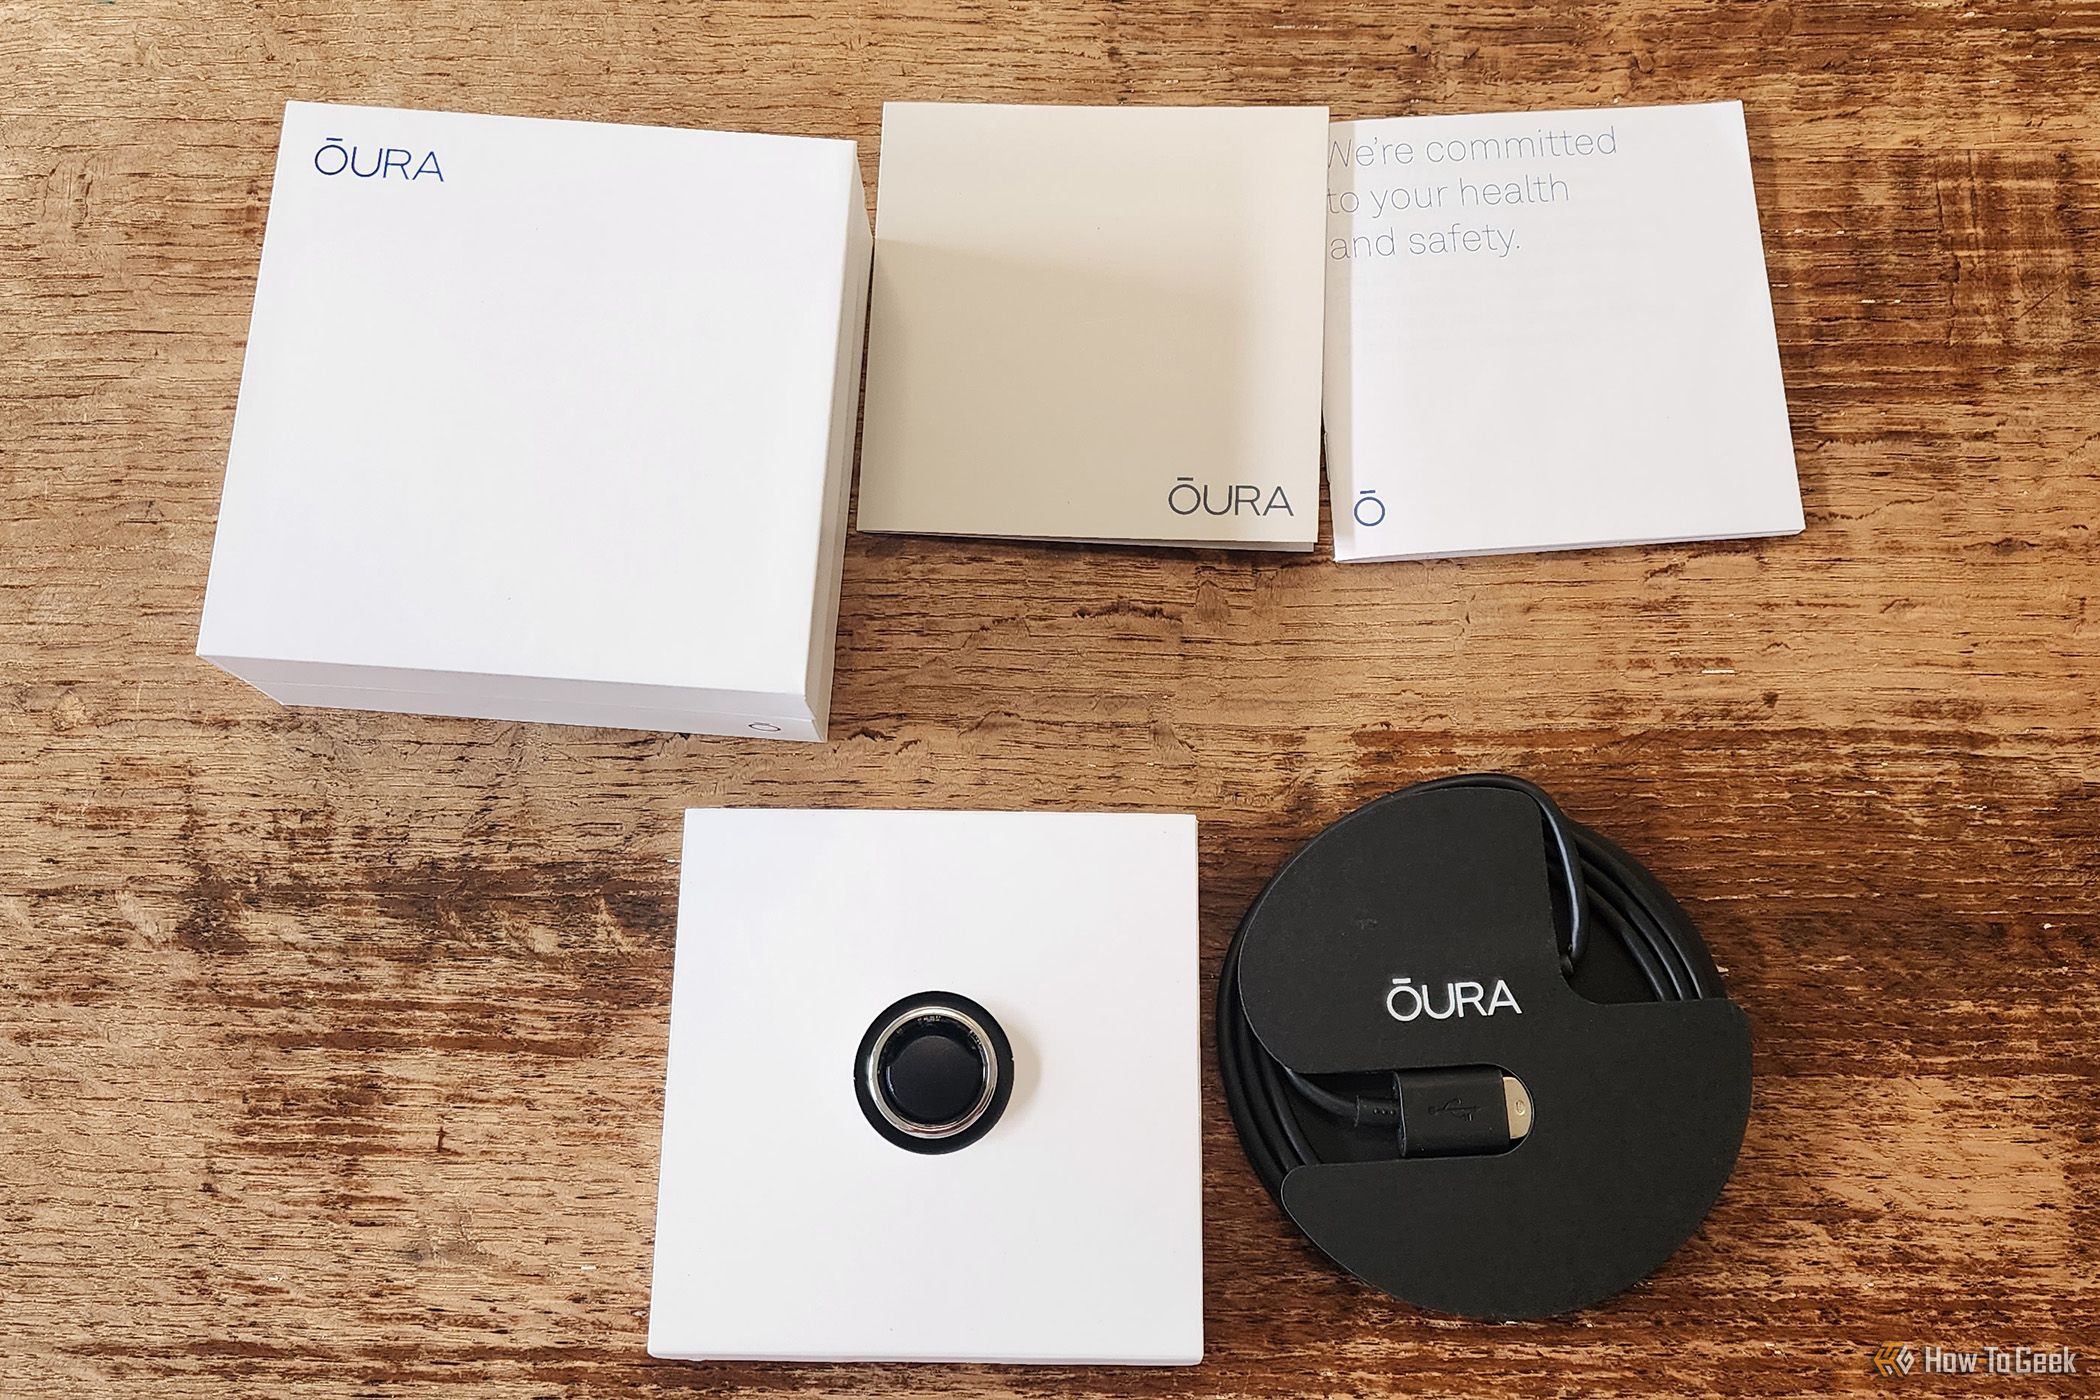 The contents of the Oura Ring Generation 3 box.